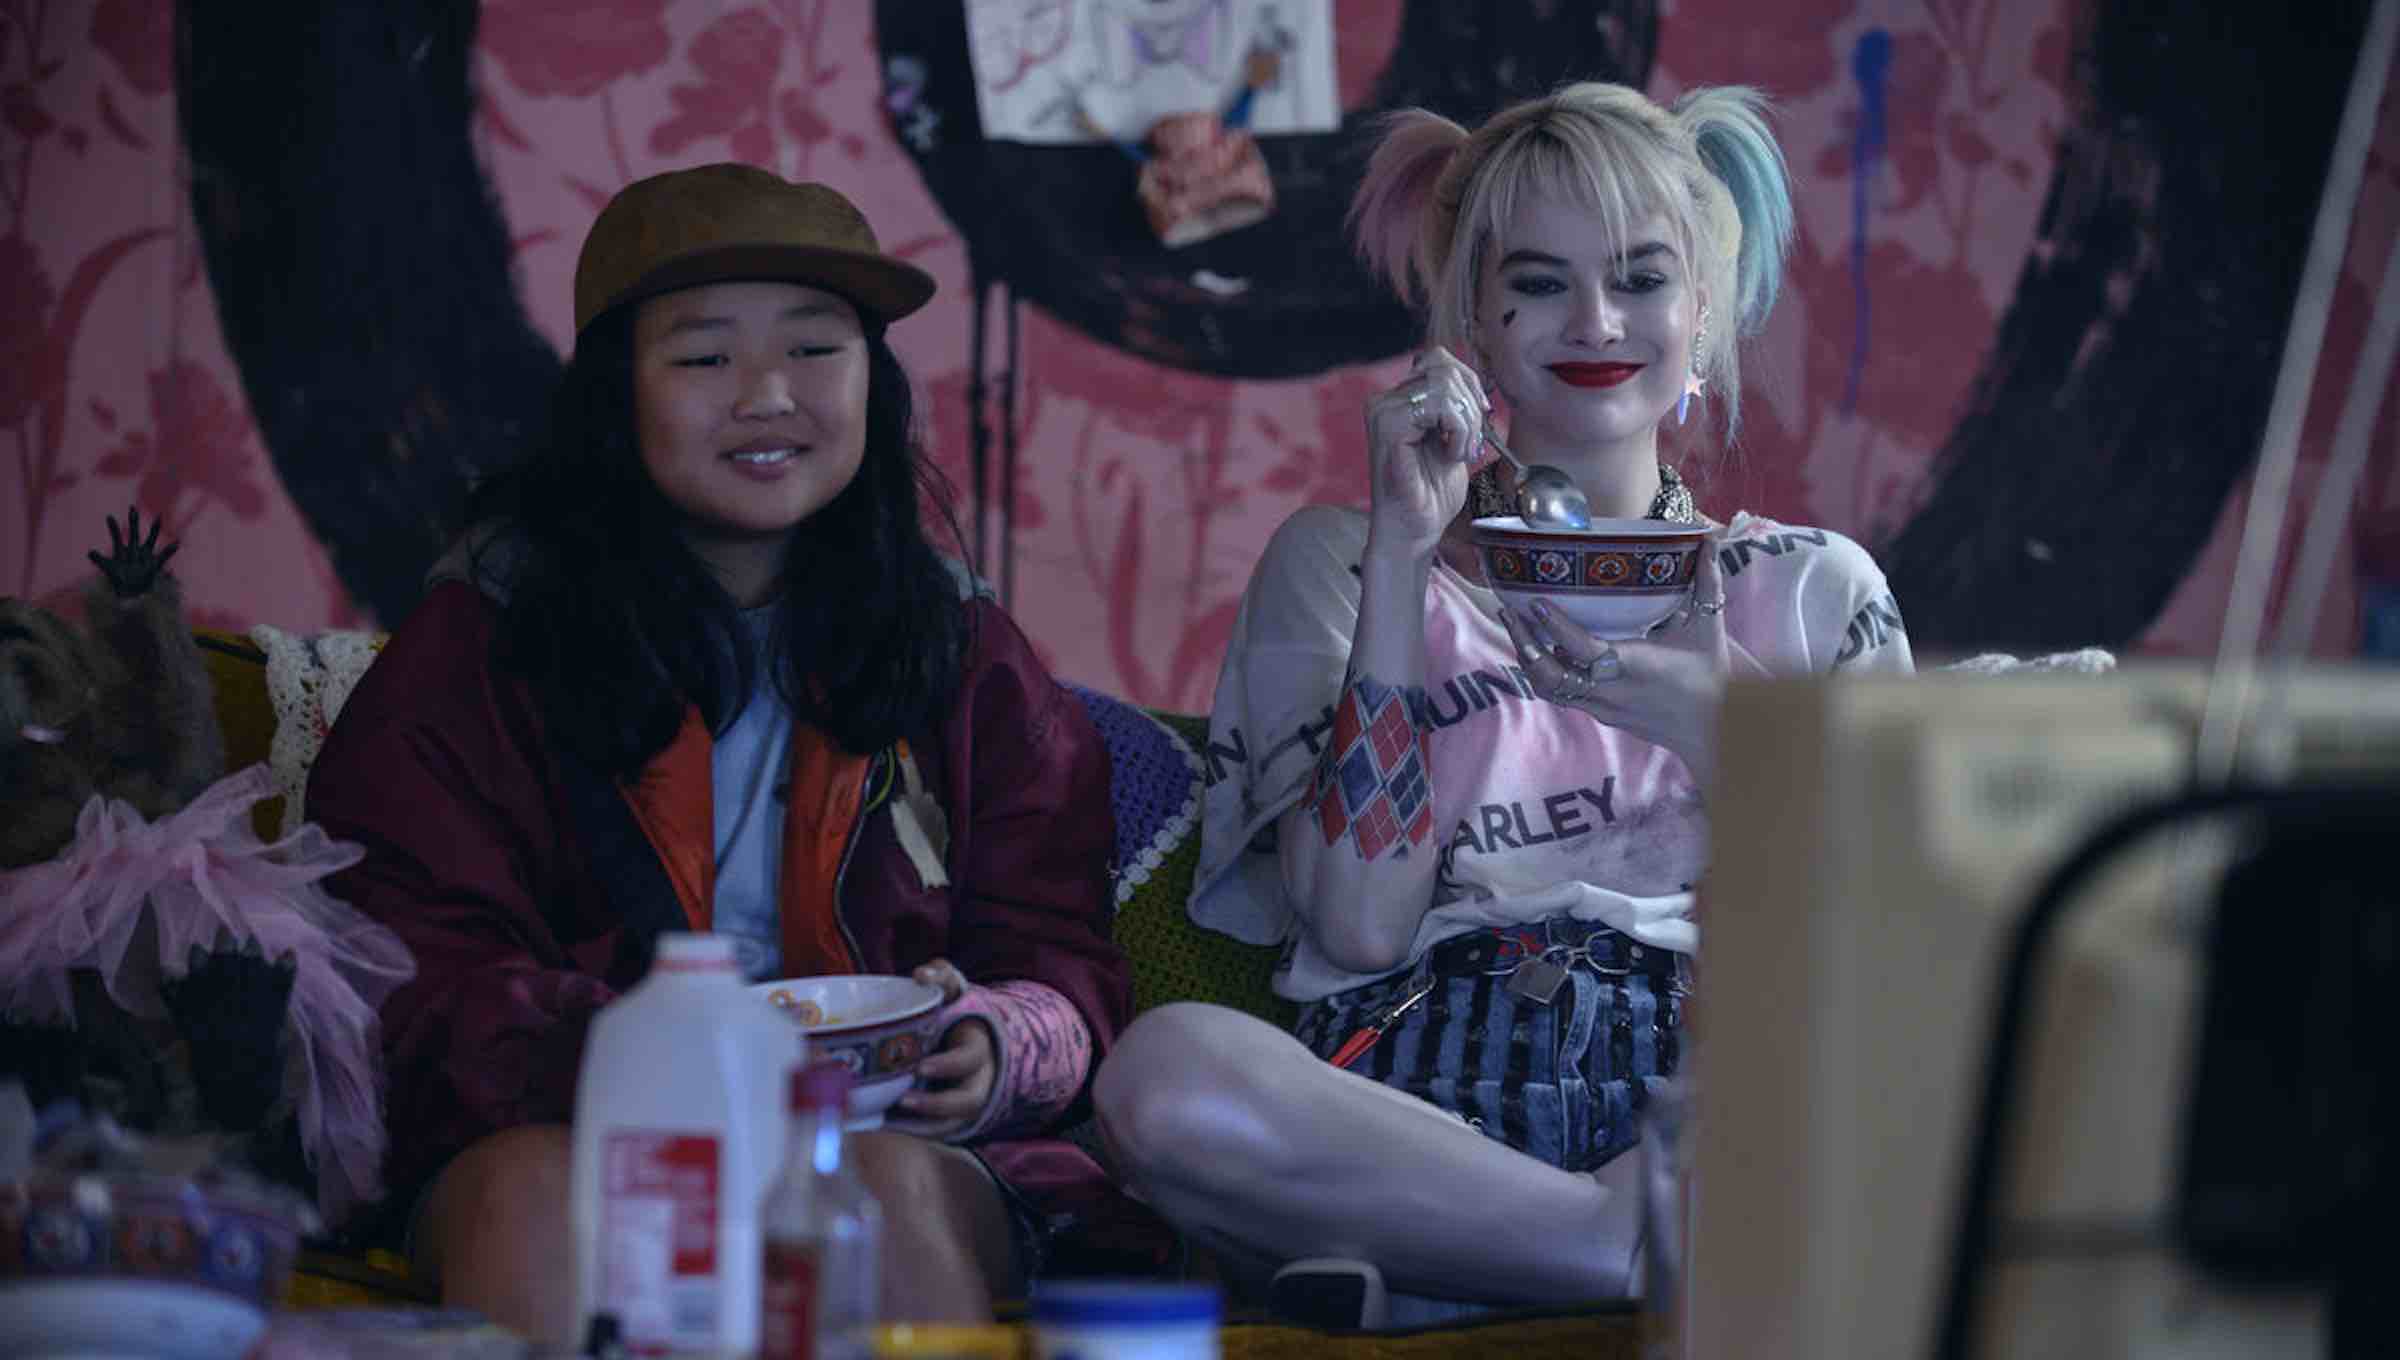 'Birds of Prey (and the Fabulous Emancipation of One Harley Quinn)' is the female team-up movie we have been waiting for. Here's what to expect.